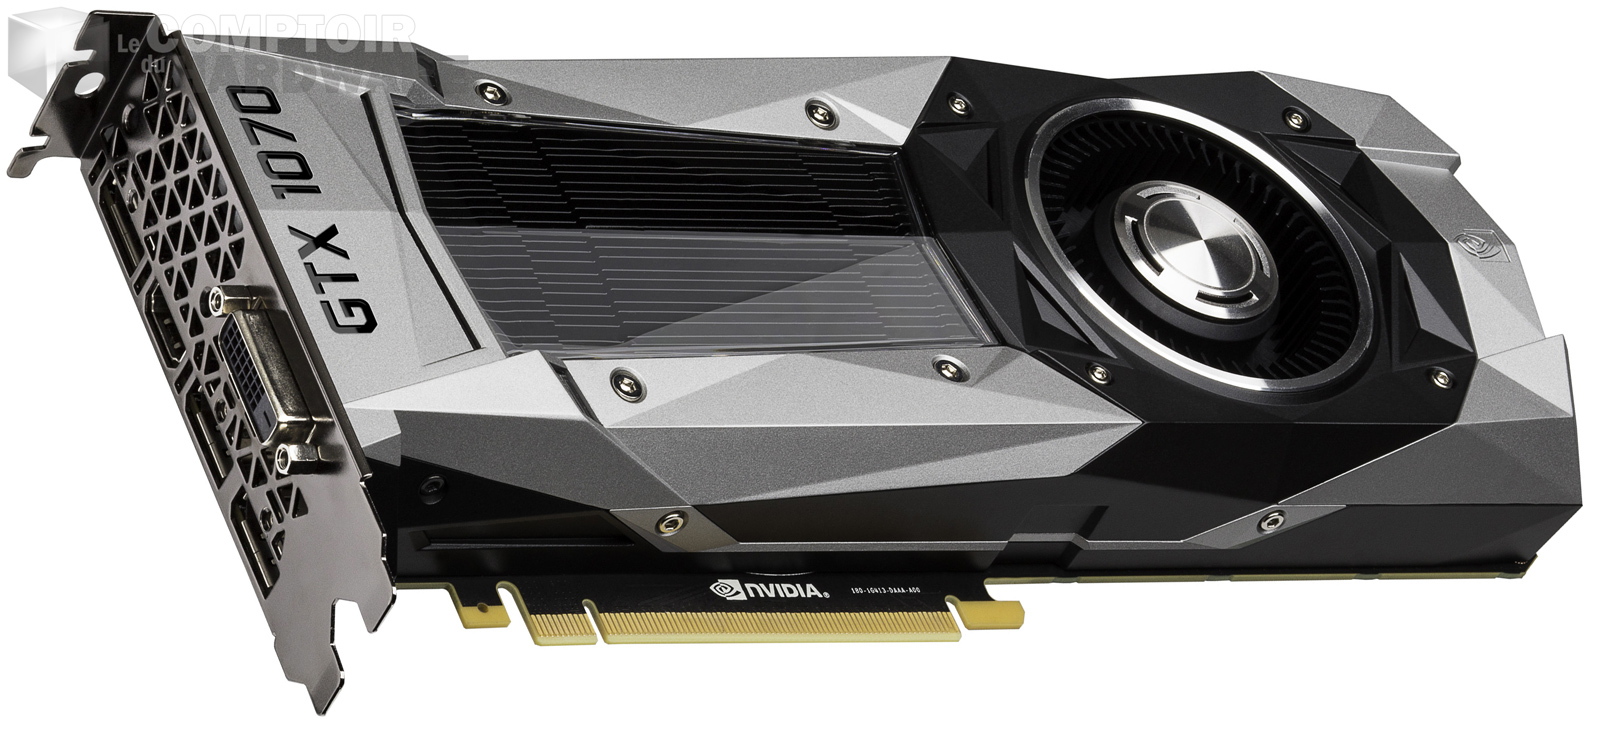 Palit GTX 1070 Founders Edition